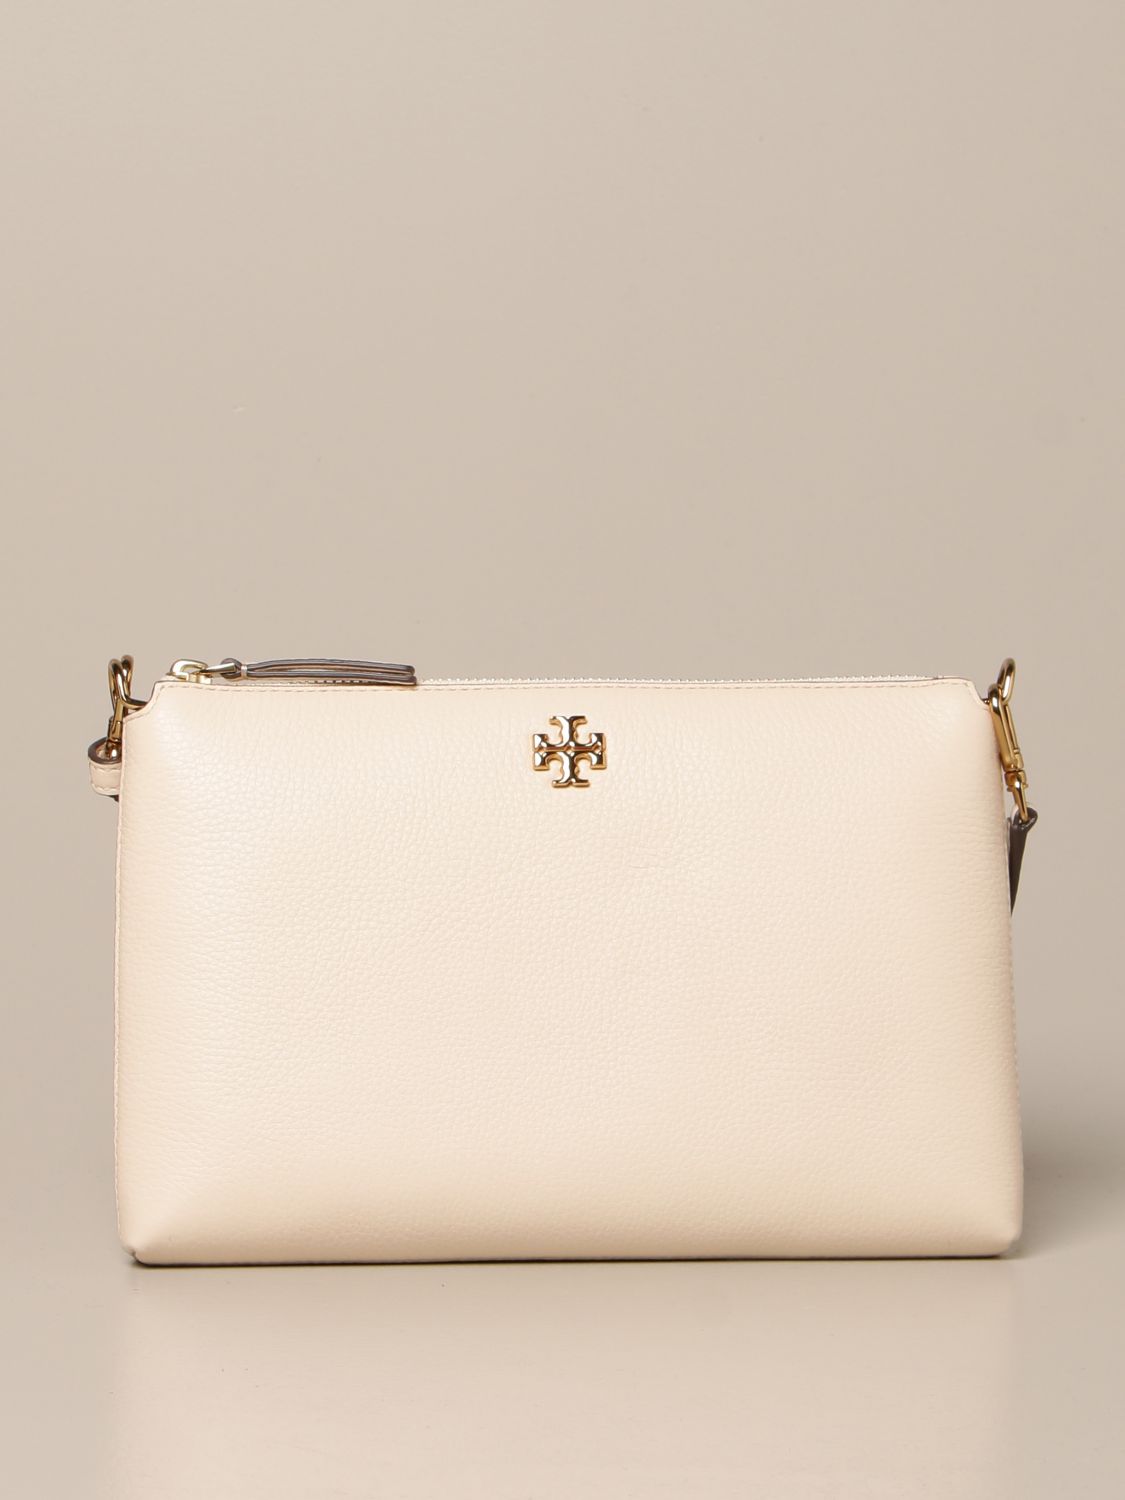 TORY BURCH: Kira Pebbled crossbody bag in textured leather - Beige | Tory  Burch crossbody bags 61385 online on 